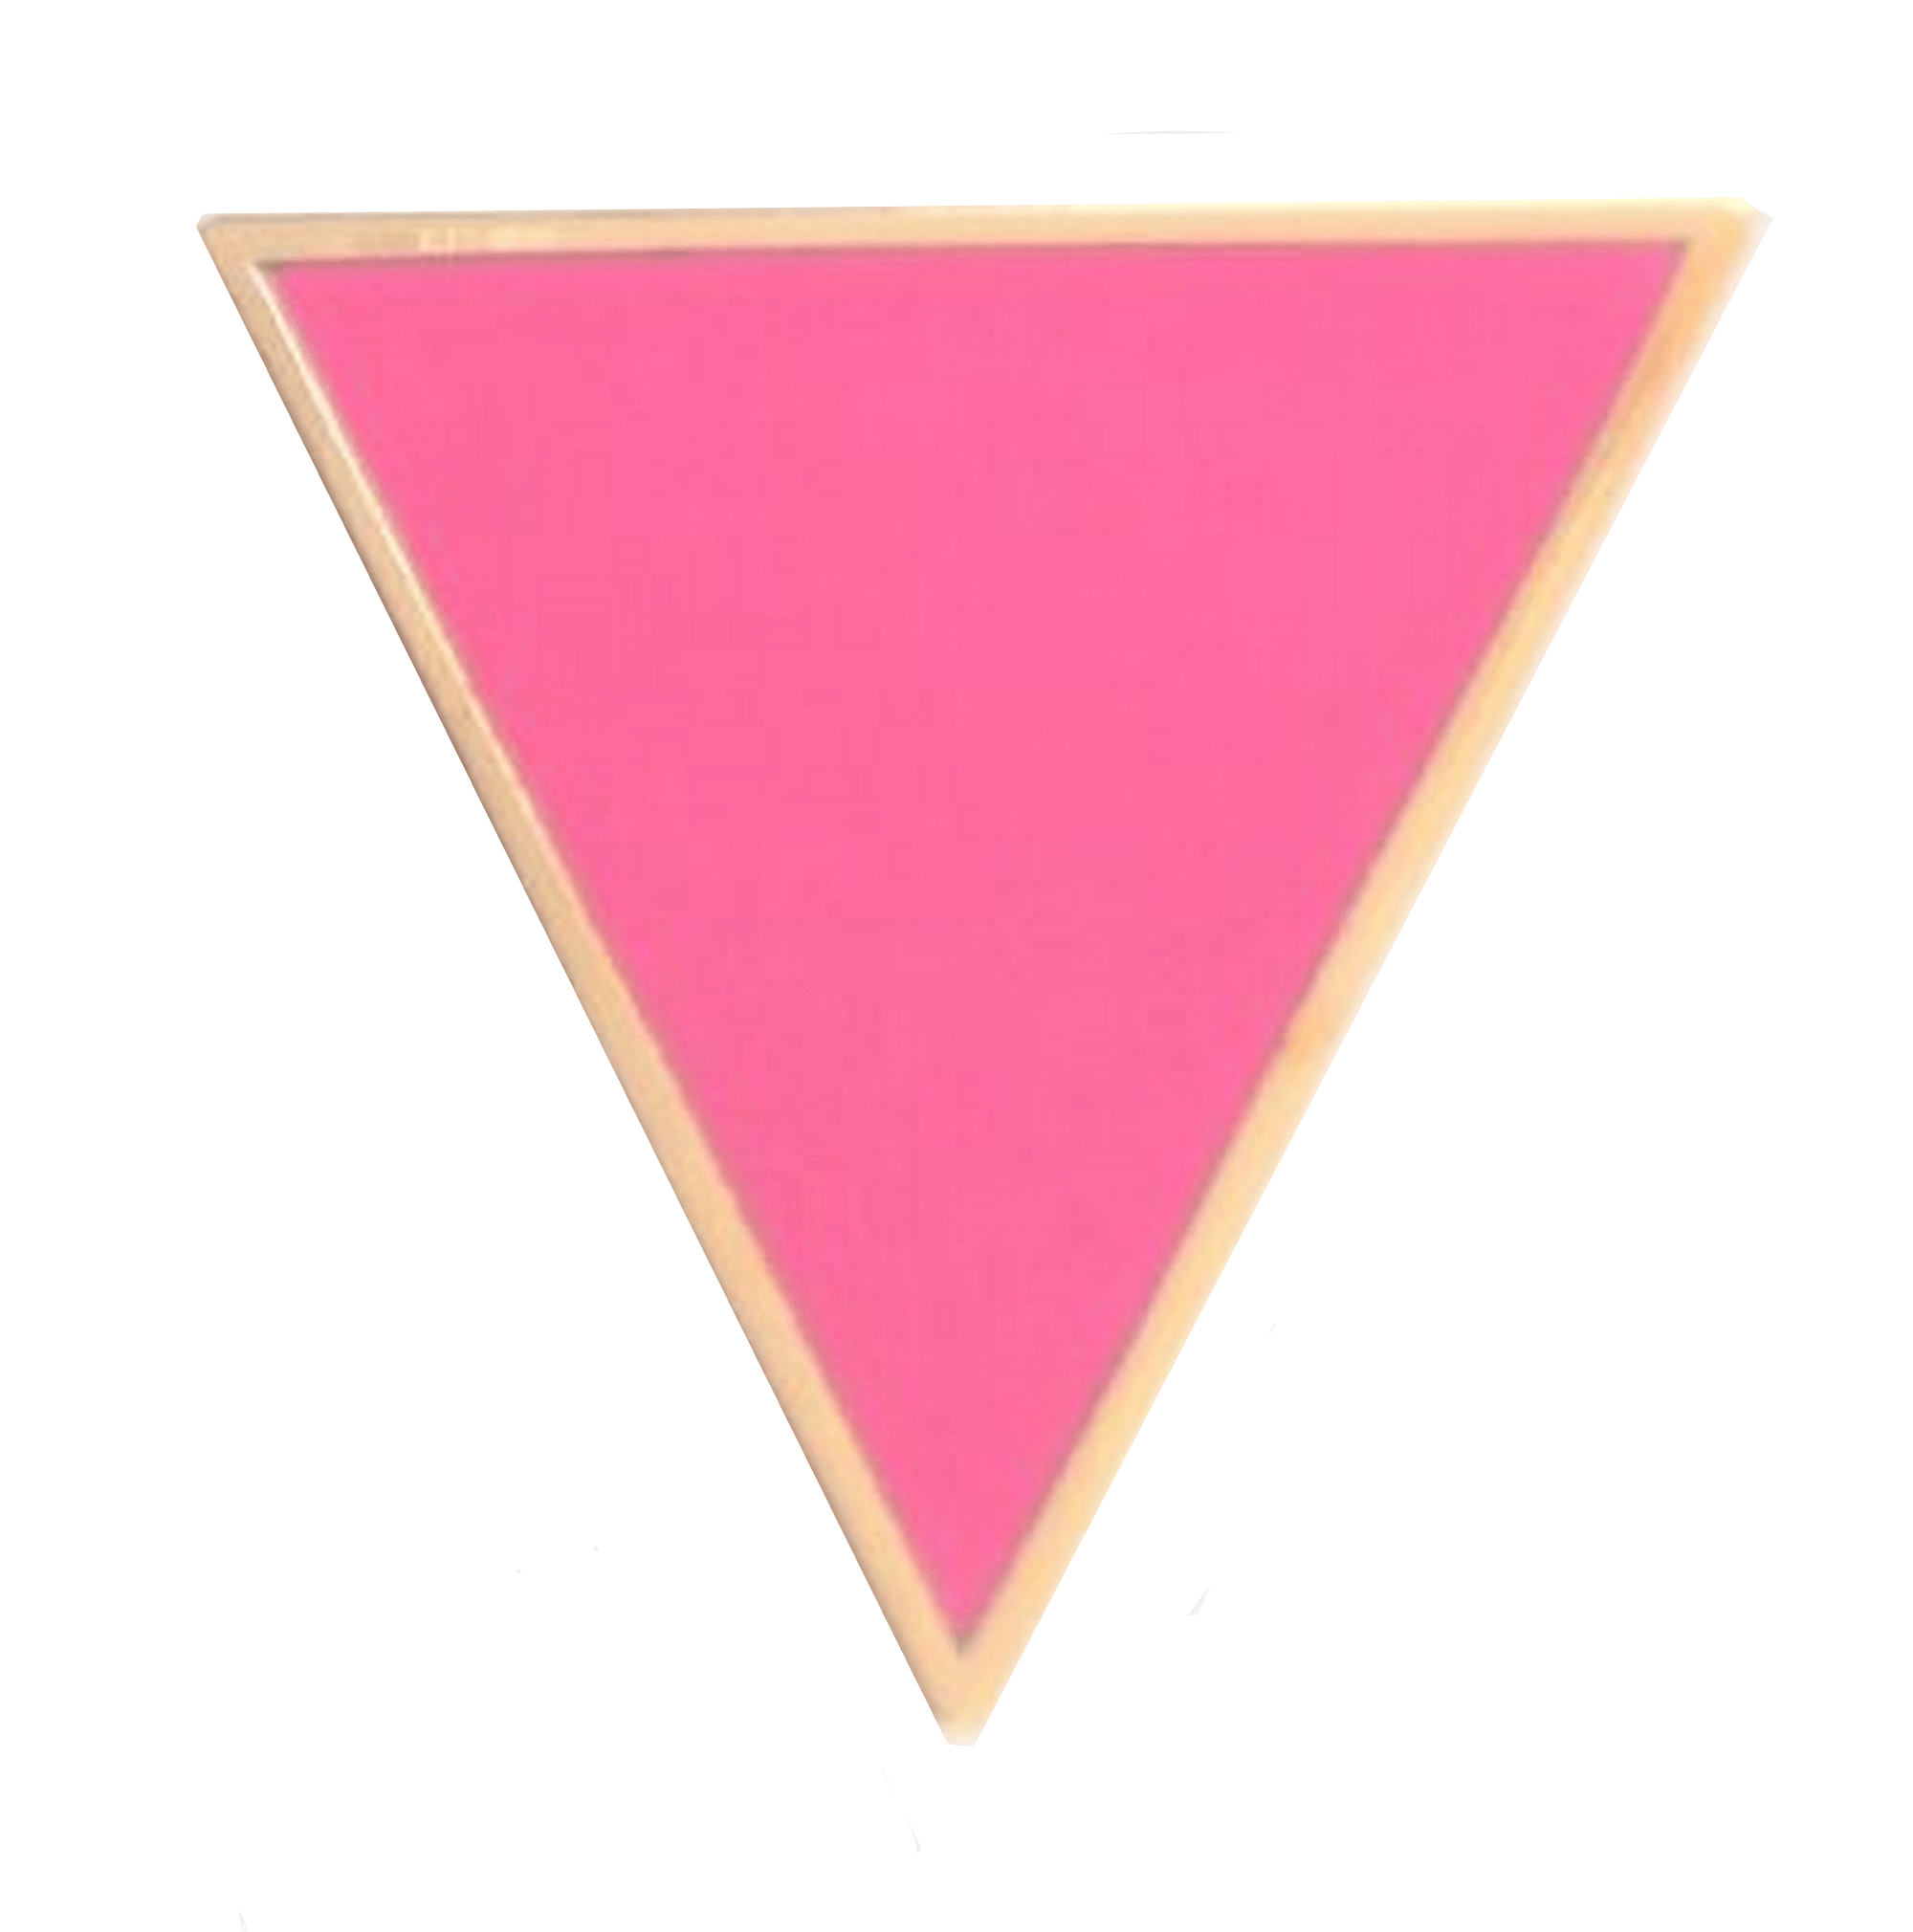 LGBT Triangle Logo - Pink Triangle LGBT Gay Pride Gold Plated Pin Badge - RB27